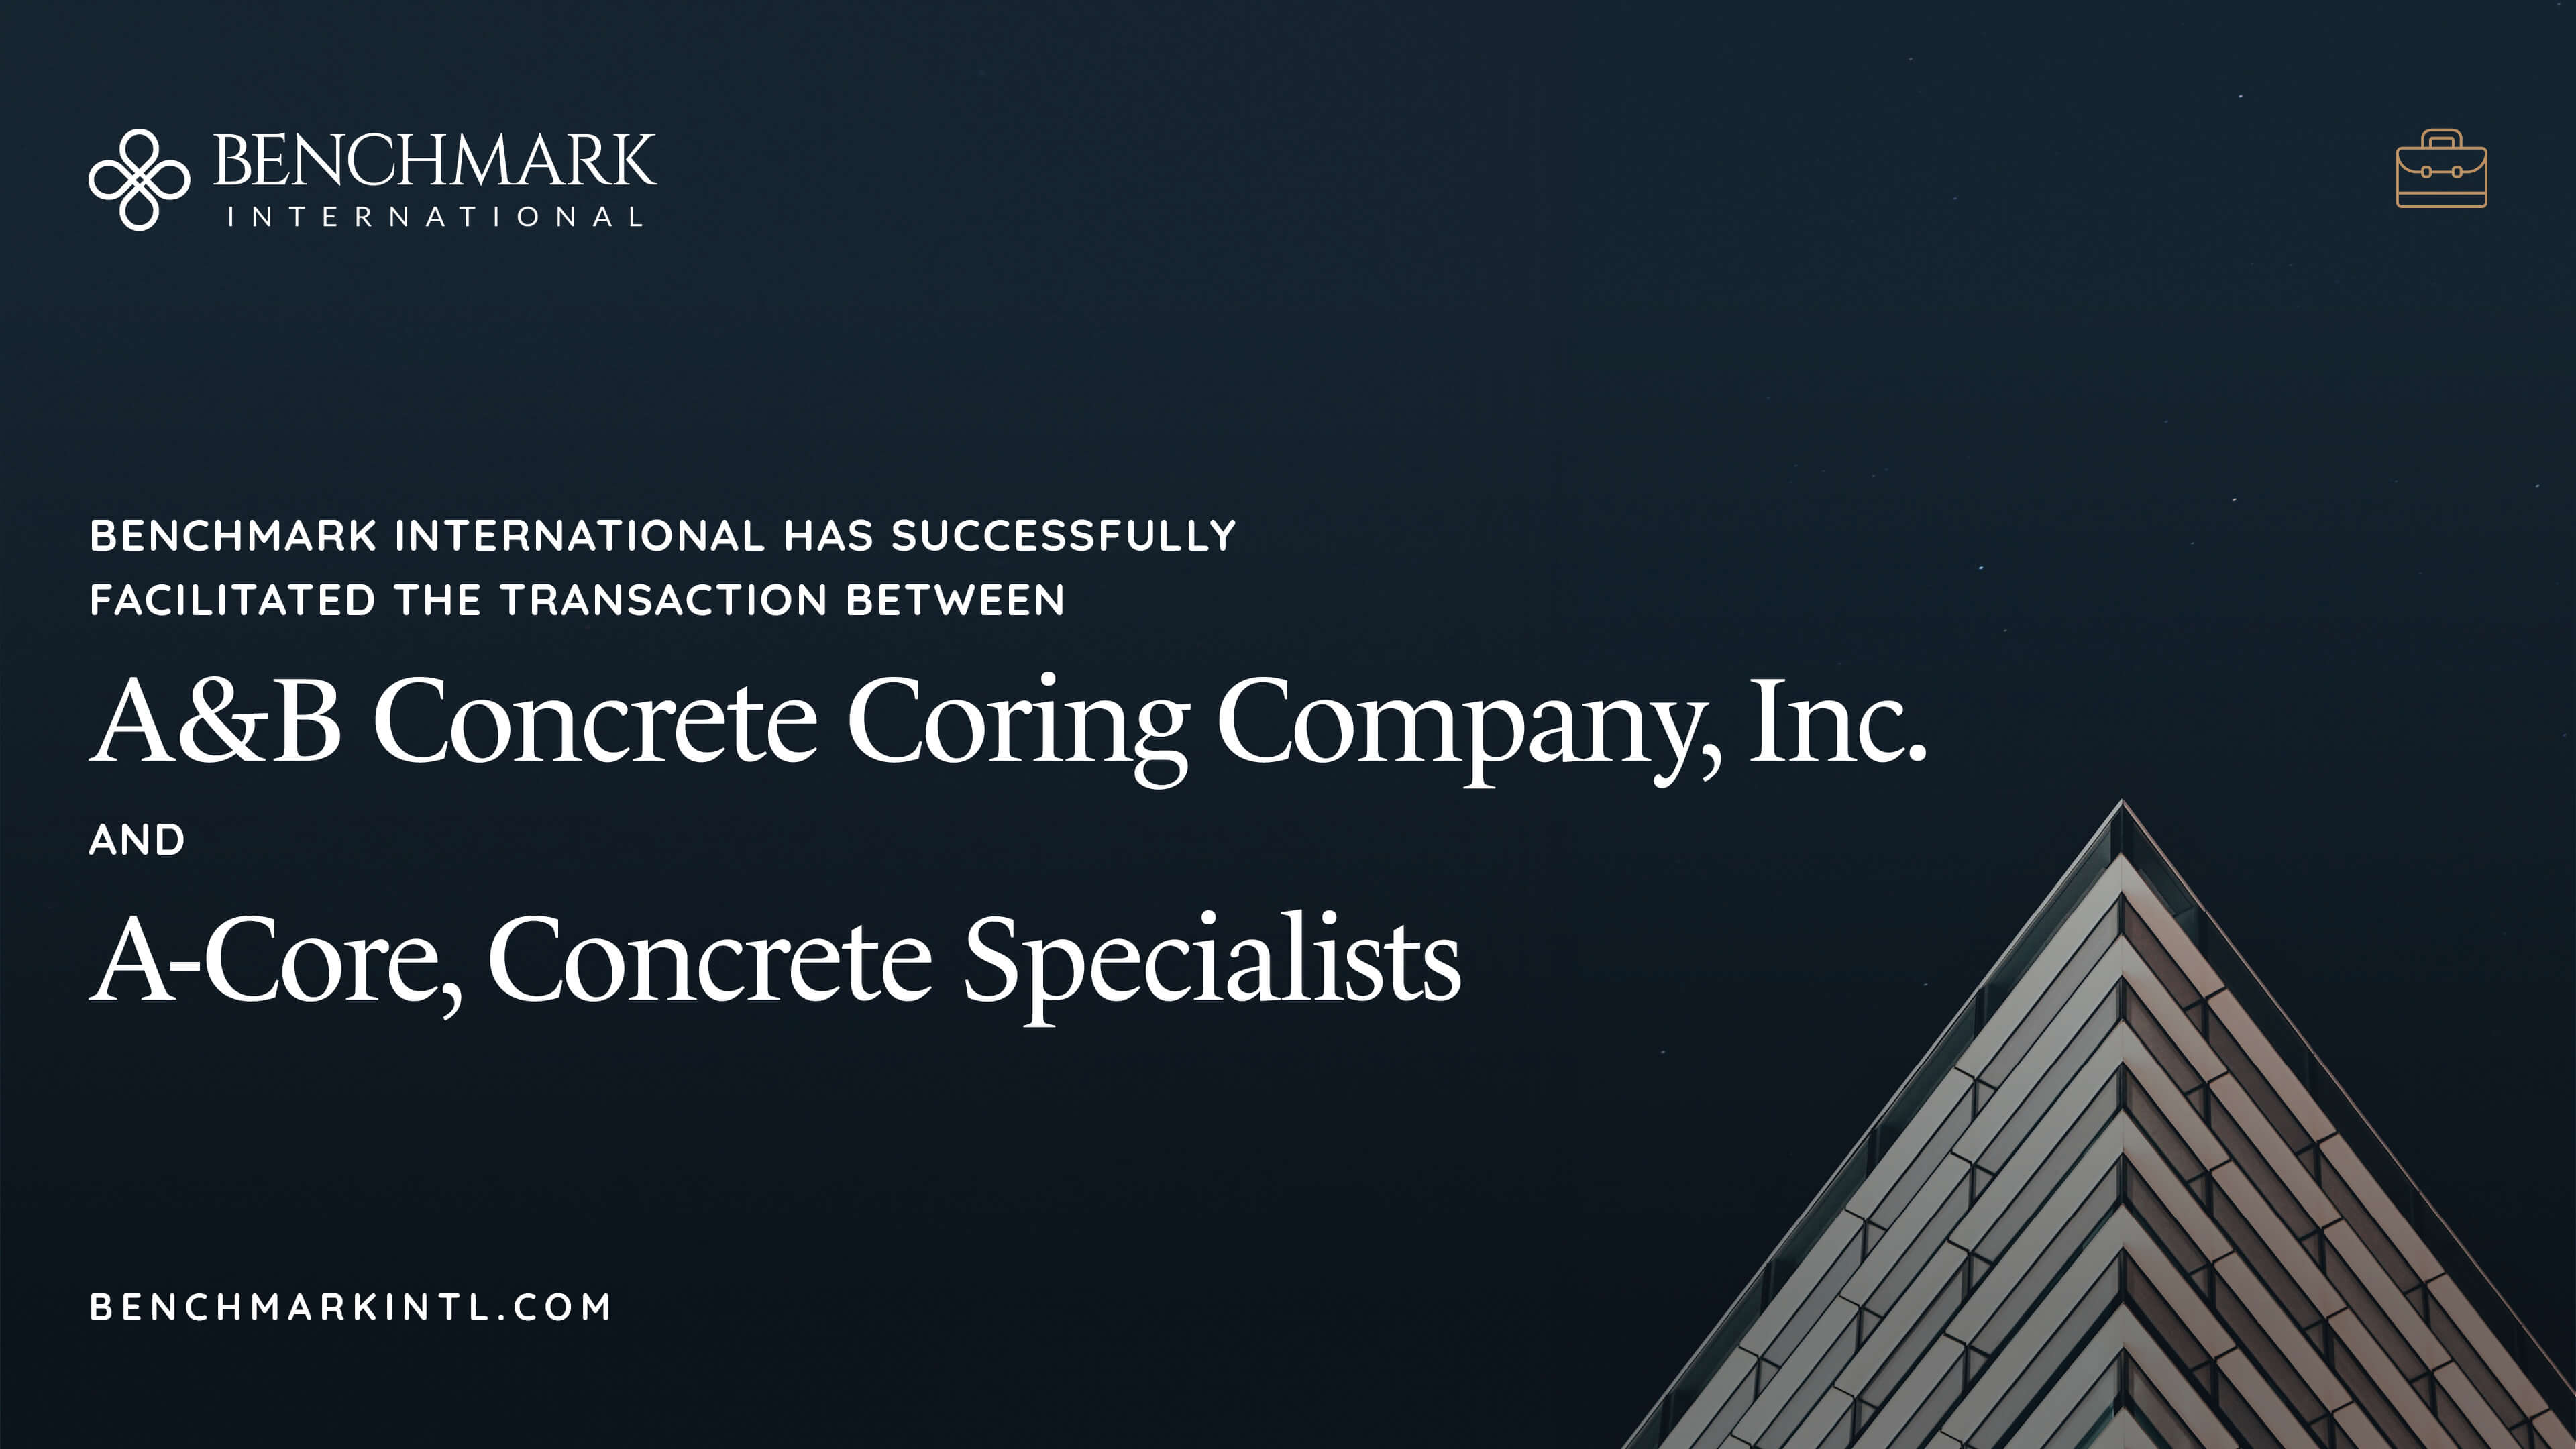 Benchmark International Has Successfully Facilitated The Transaction Between A&B Concrete Coring Company Inc. And A-Core, Concrete Specialists